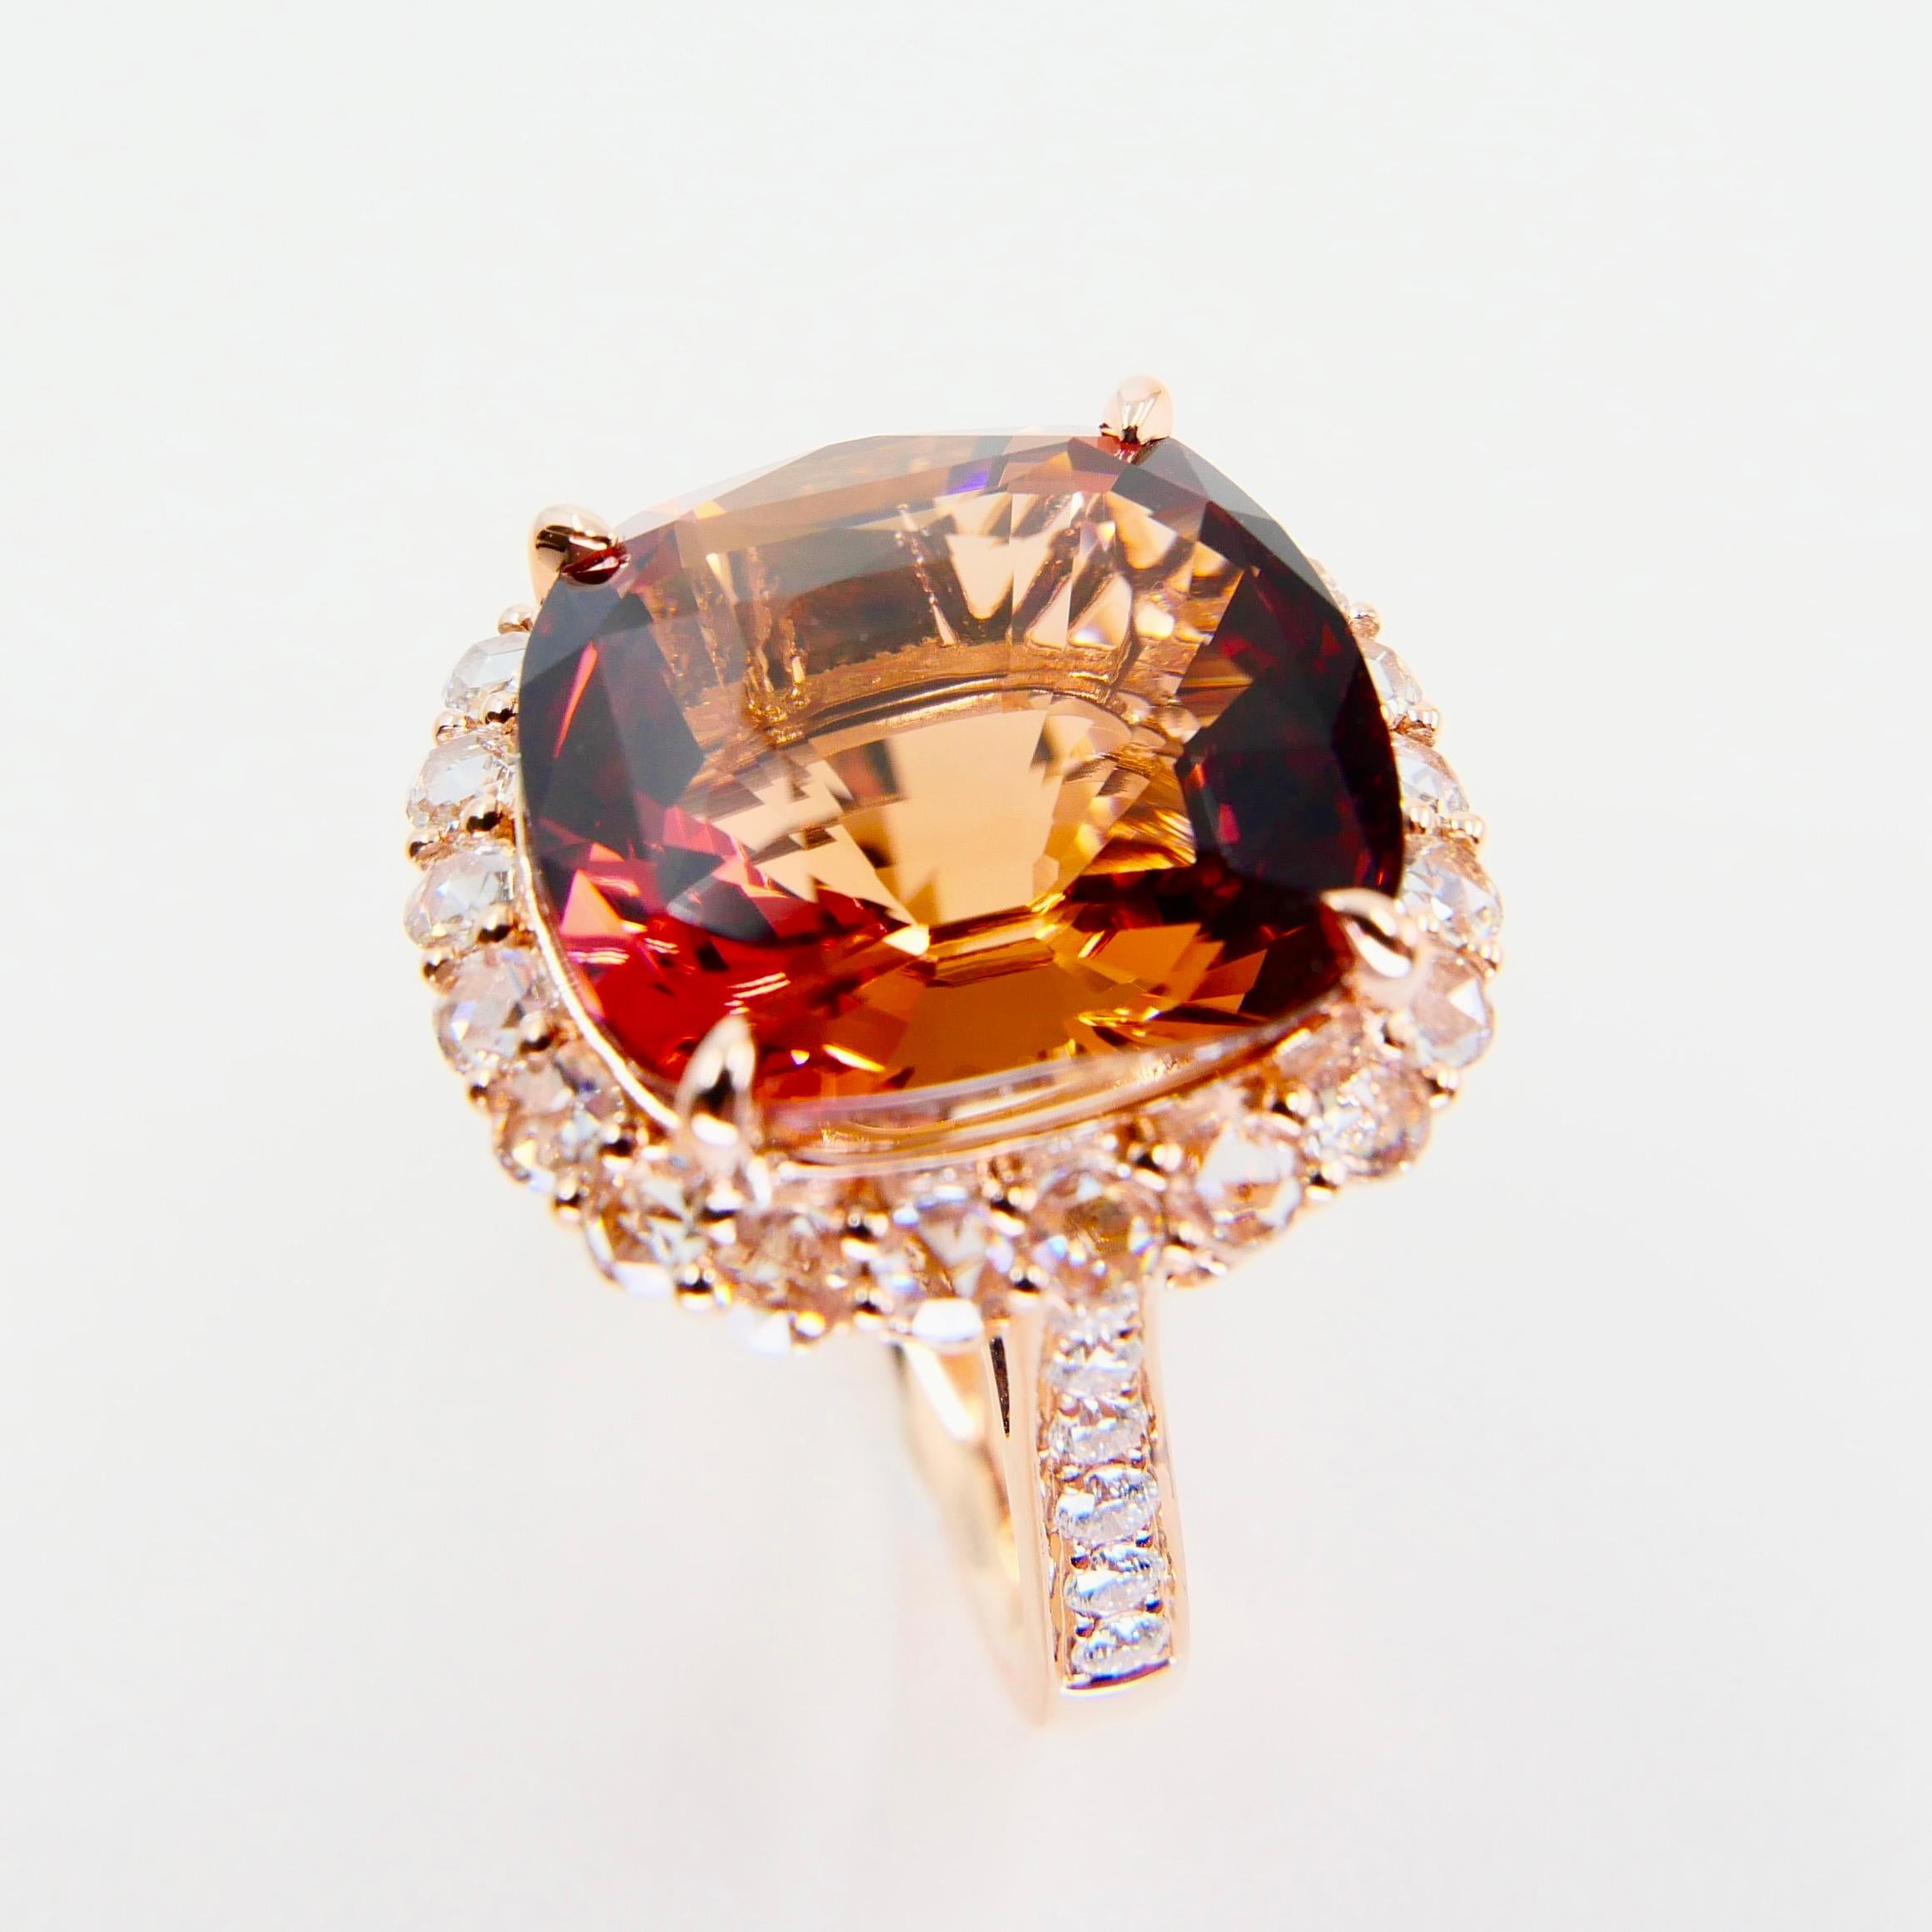 GIA Certified 11.55 Cts Orange Pink Tourmaline & Rose Cut Diamond Cocktail Ring For Sale 8